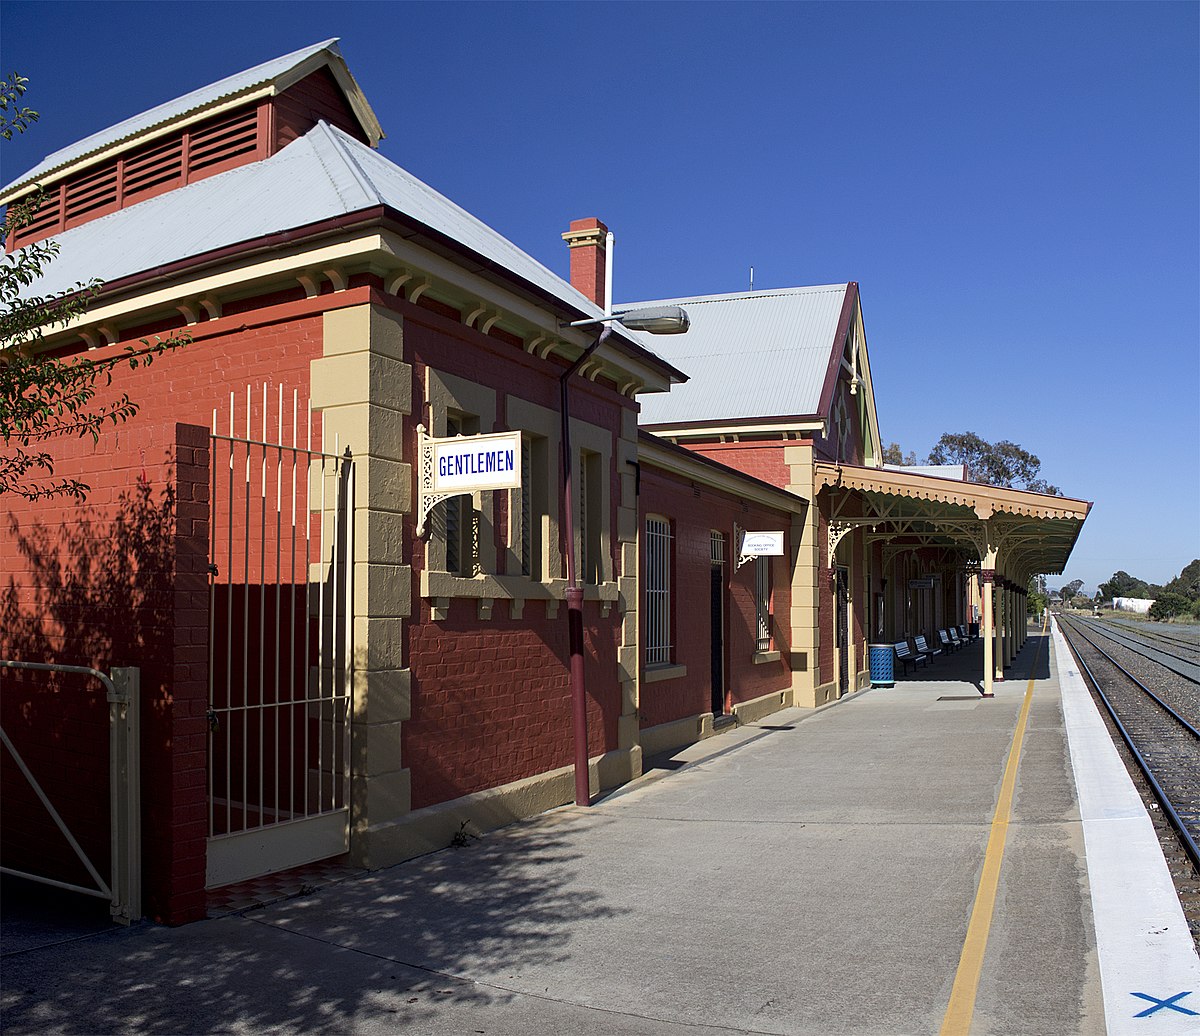 Railway station at Queanbeyan flagged for accessibility upgrade